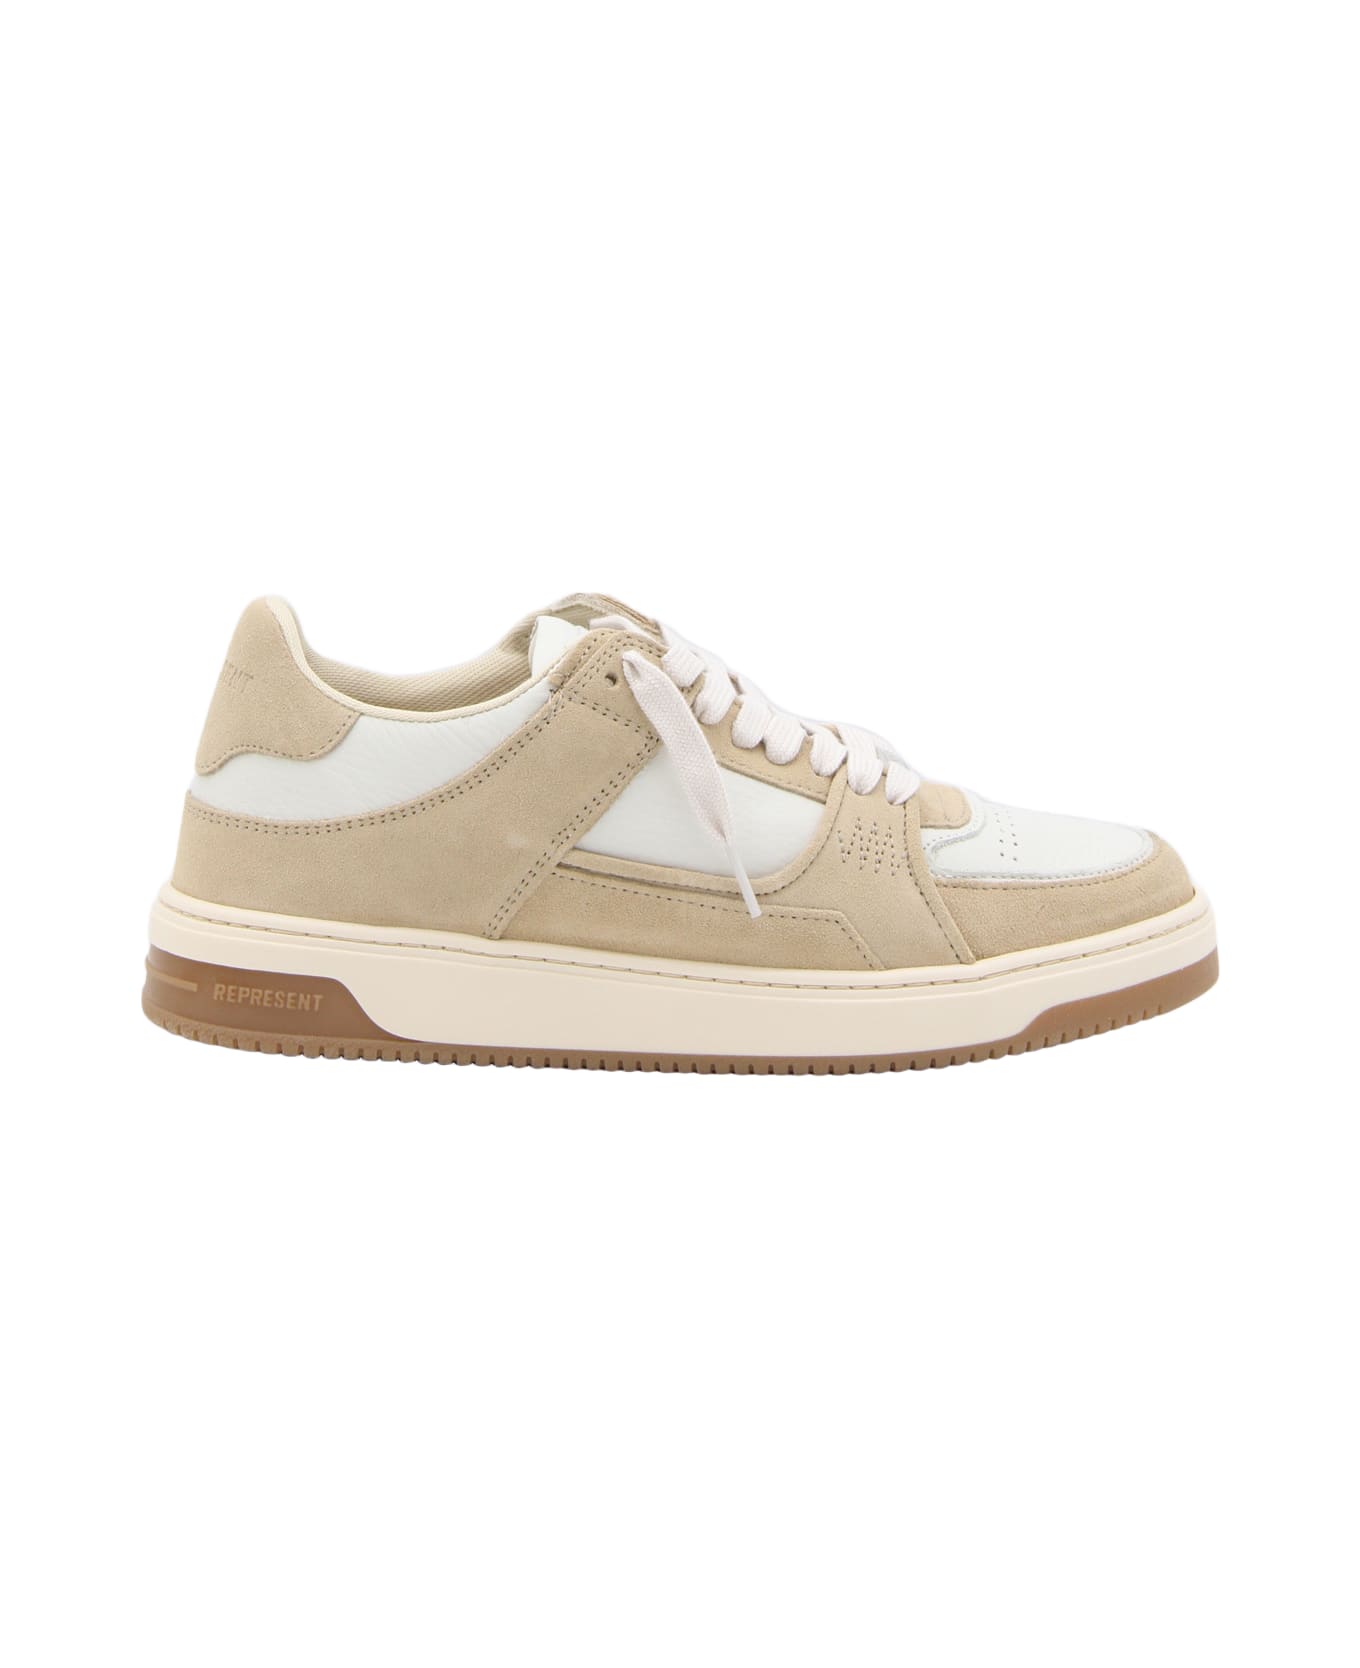 REPRESENT Sand Suede Apex Sneakers - SAND スニーカー